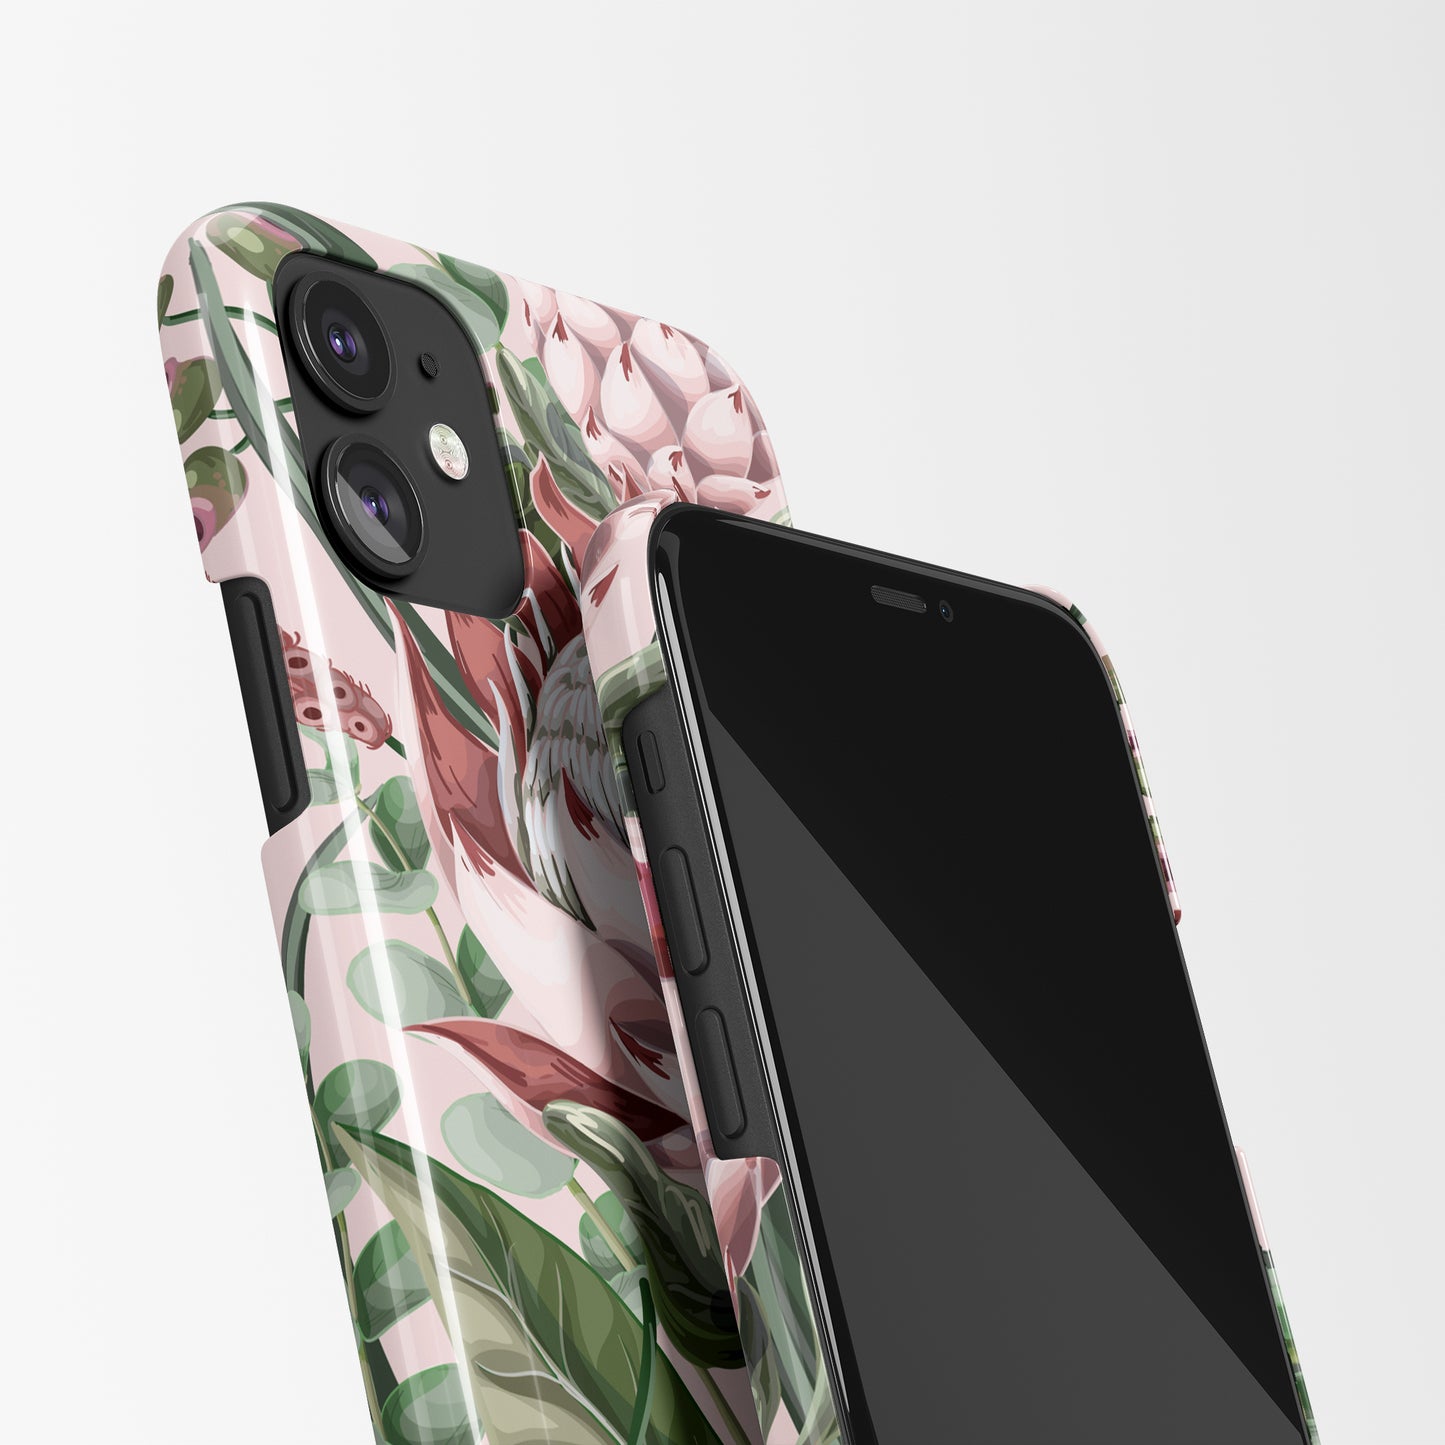 Floral iPhone Case with handdrawn prints